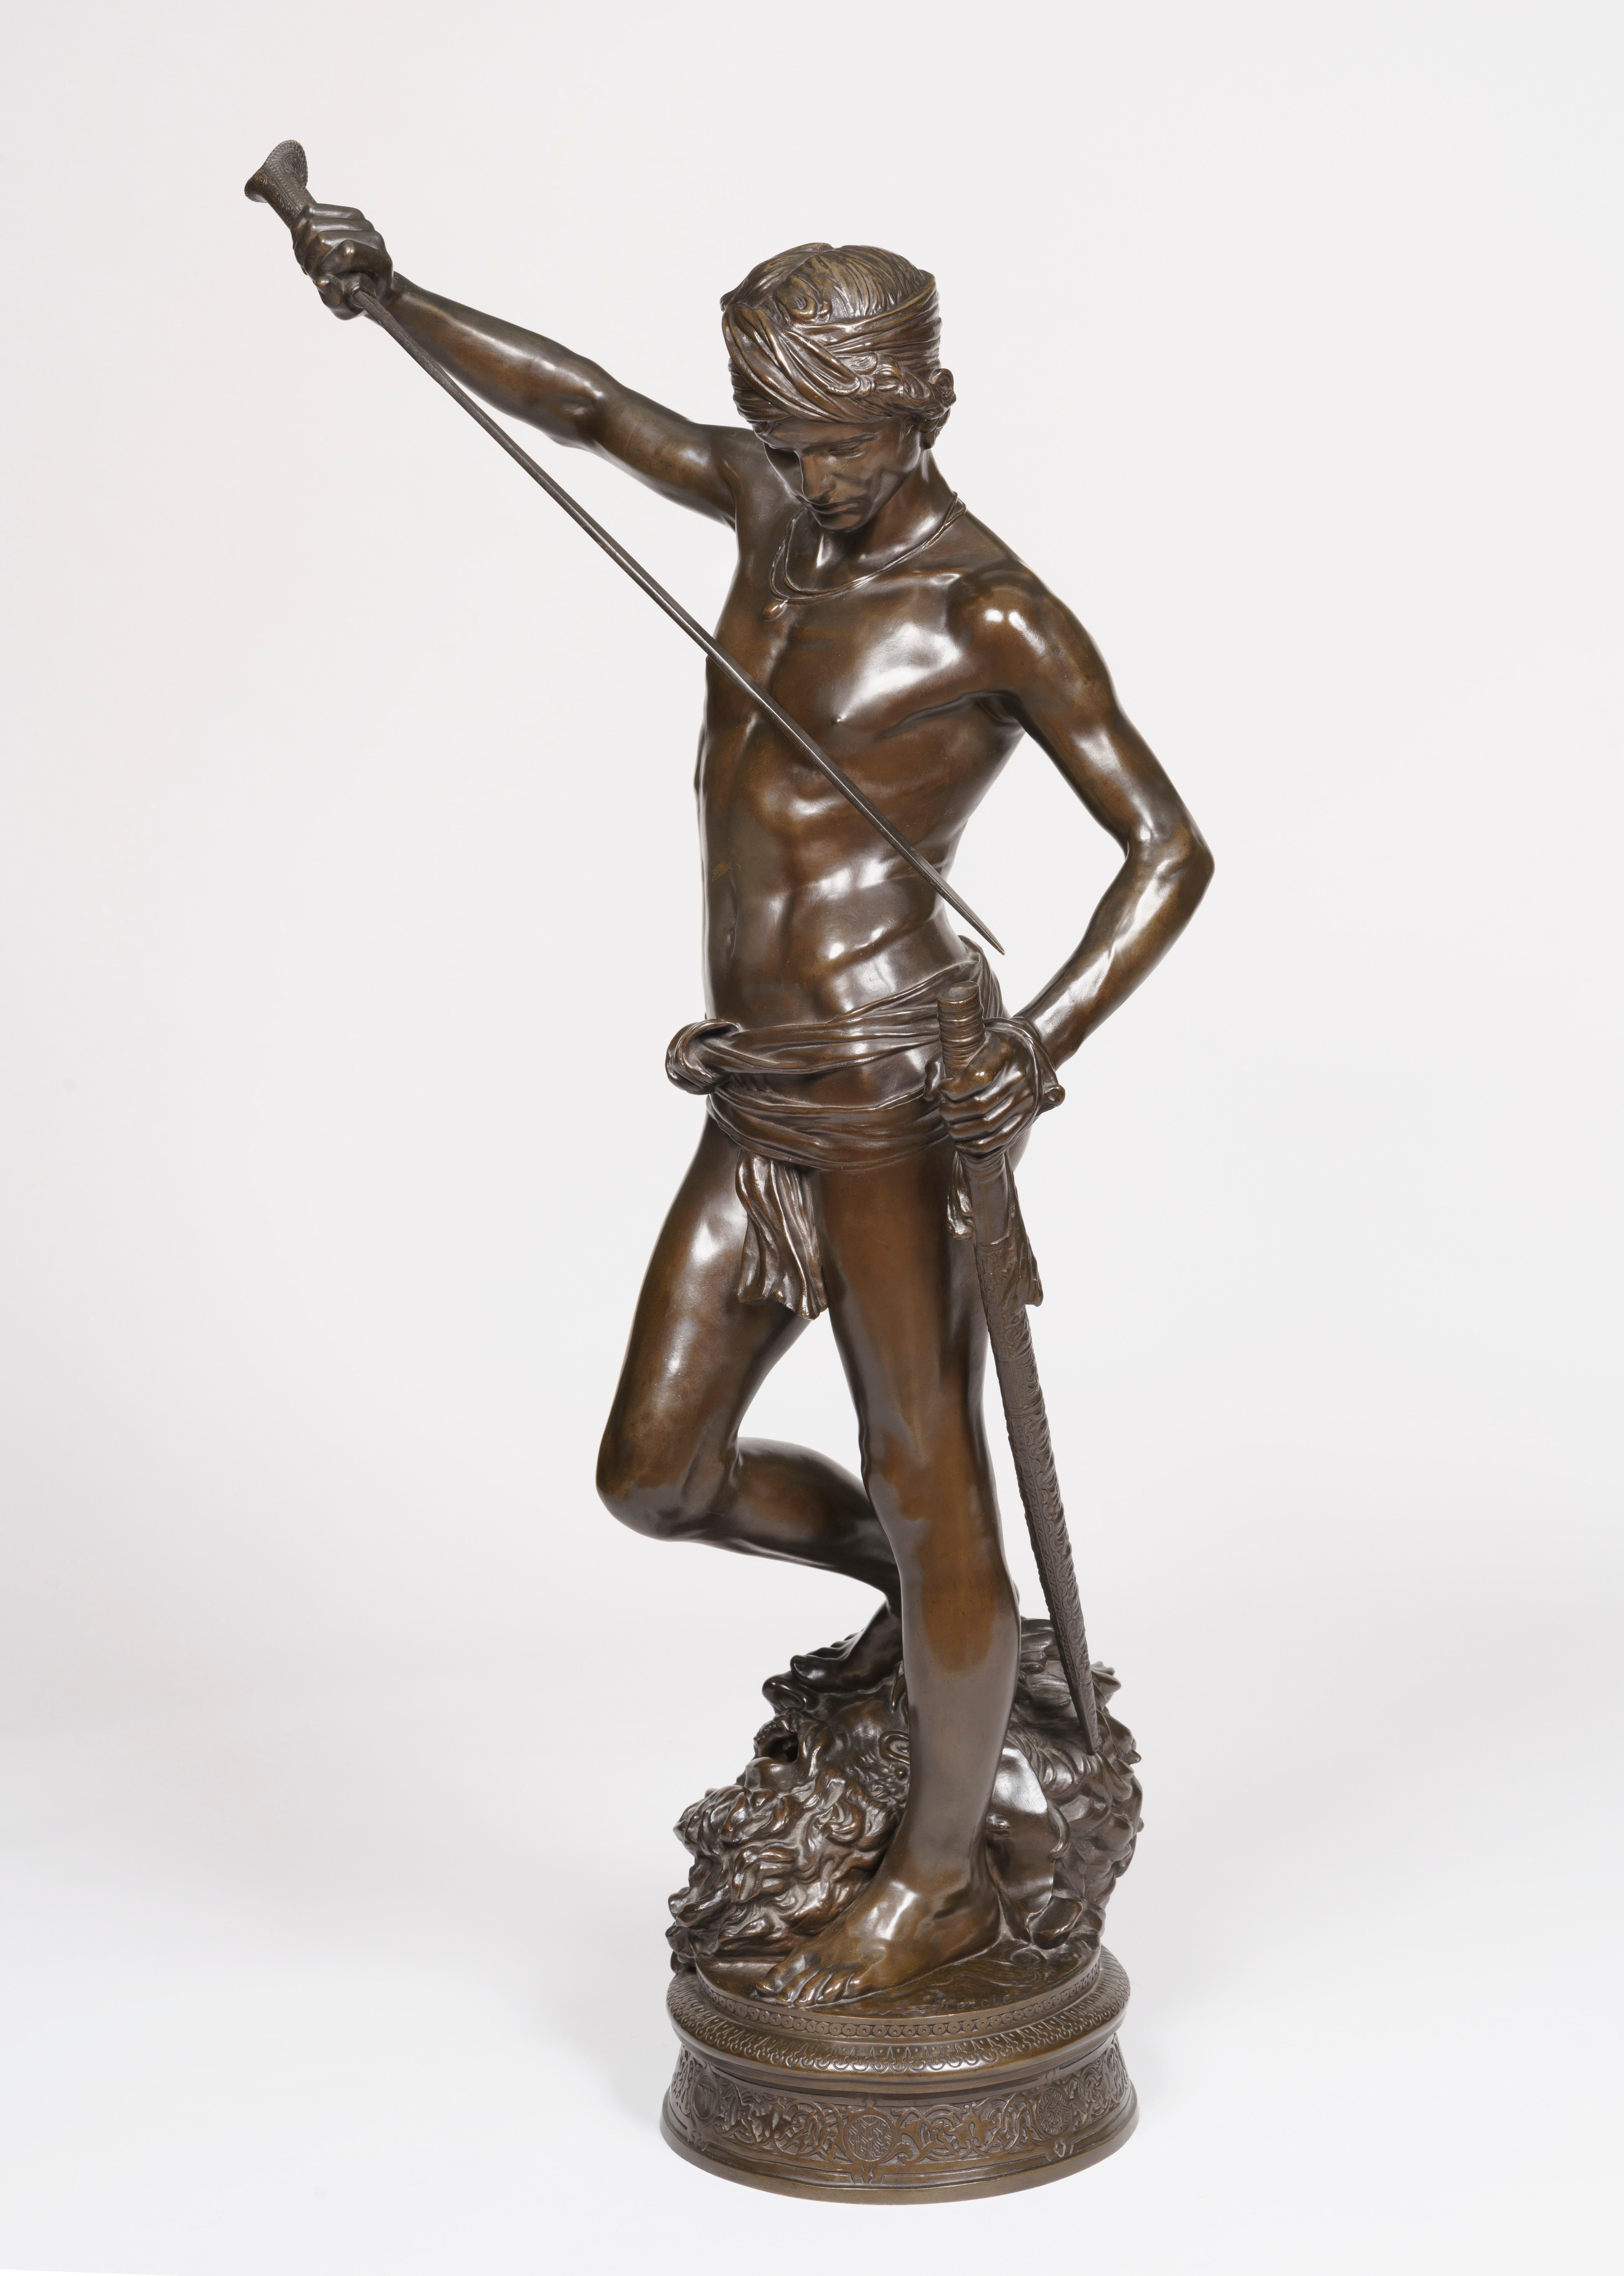 'David, the conqueror of Goliath'
An exceptional Barbedienne cast of the statue executed by J.A. Mercié

Of good size, using very finely cast and chased patinated bronze, depicting the young David with the head of Goliath at his feet, on a